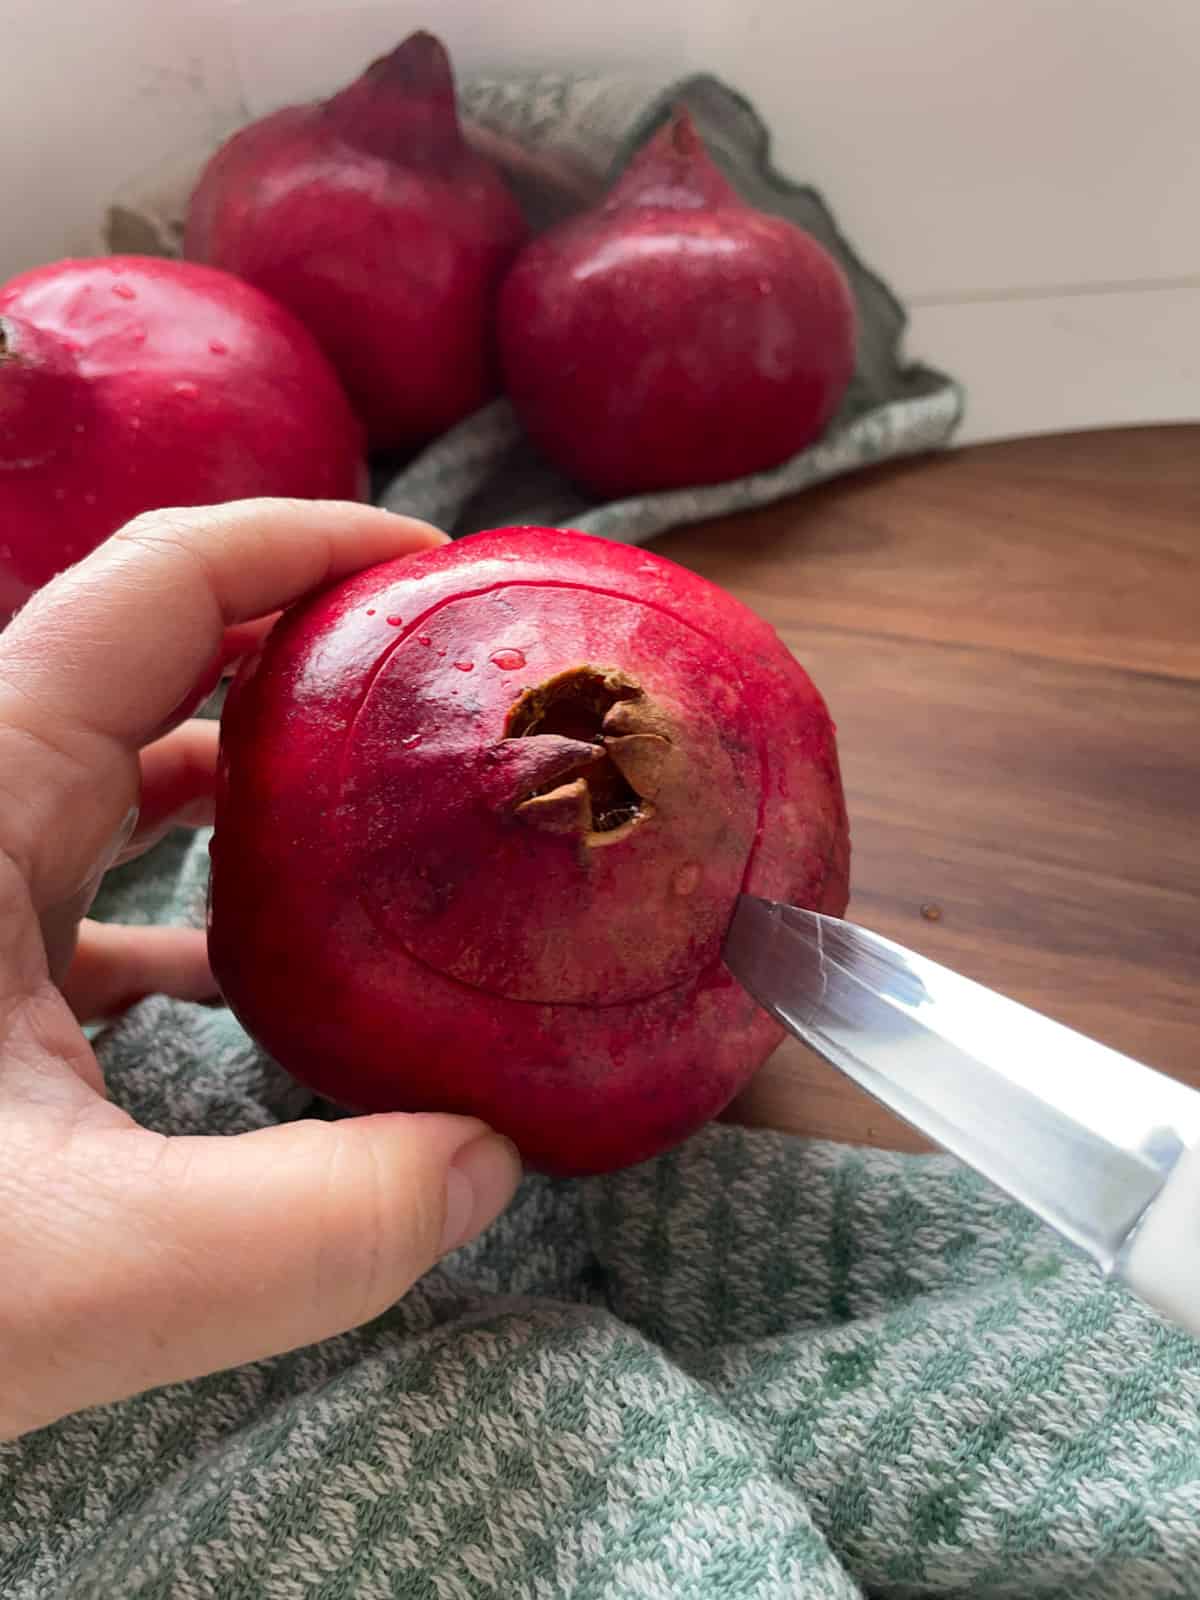 Scoring the top of a pomegranate with a paring knife.